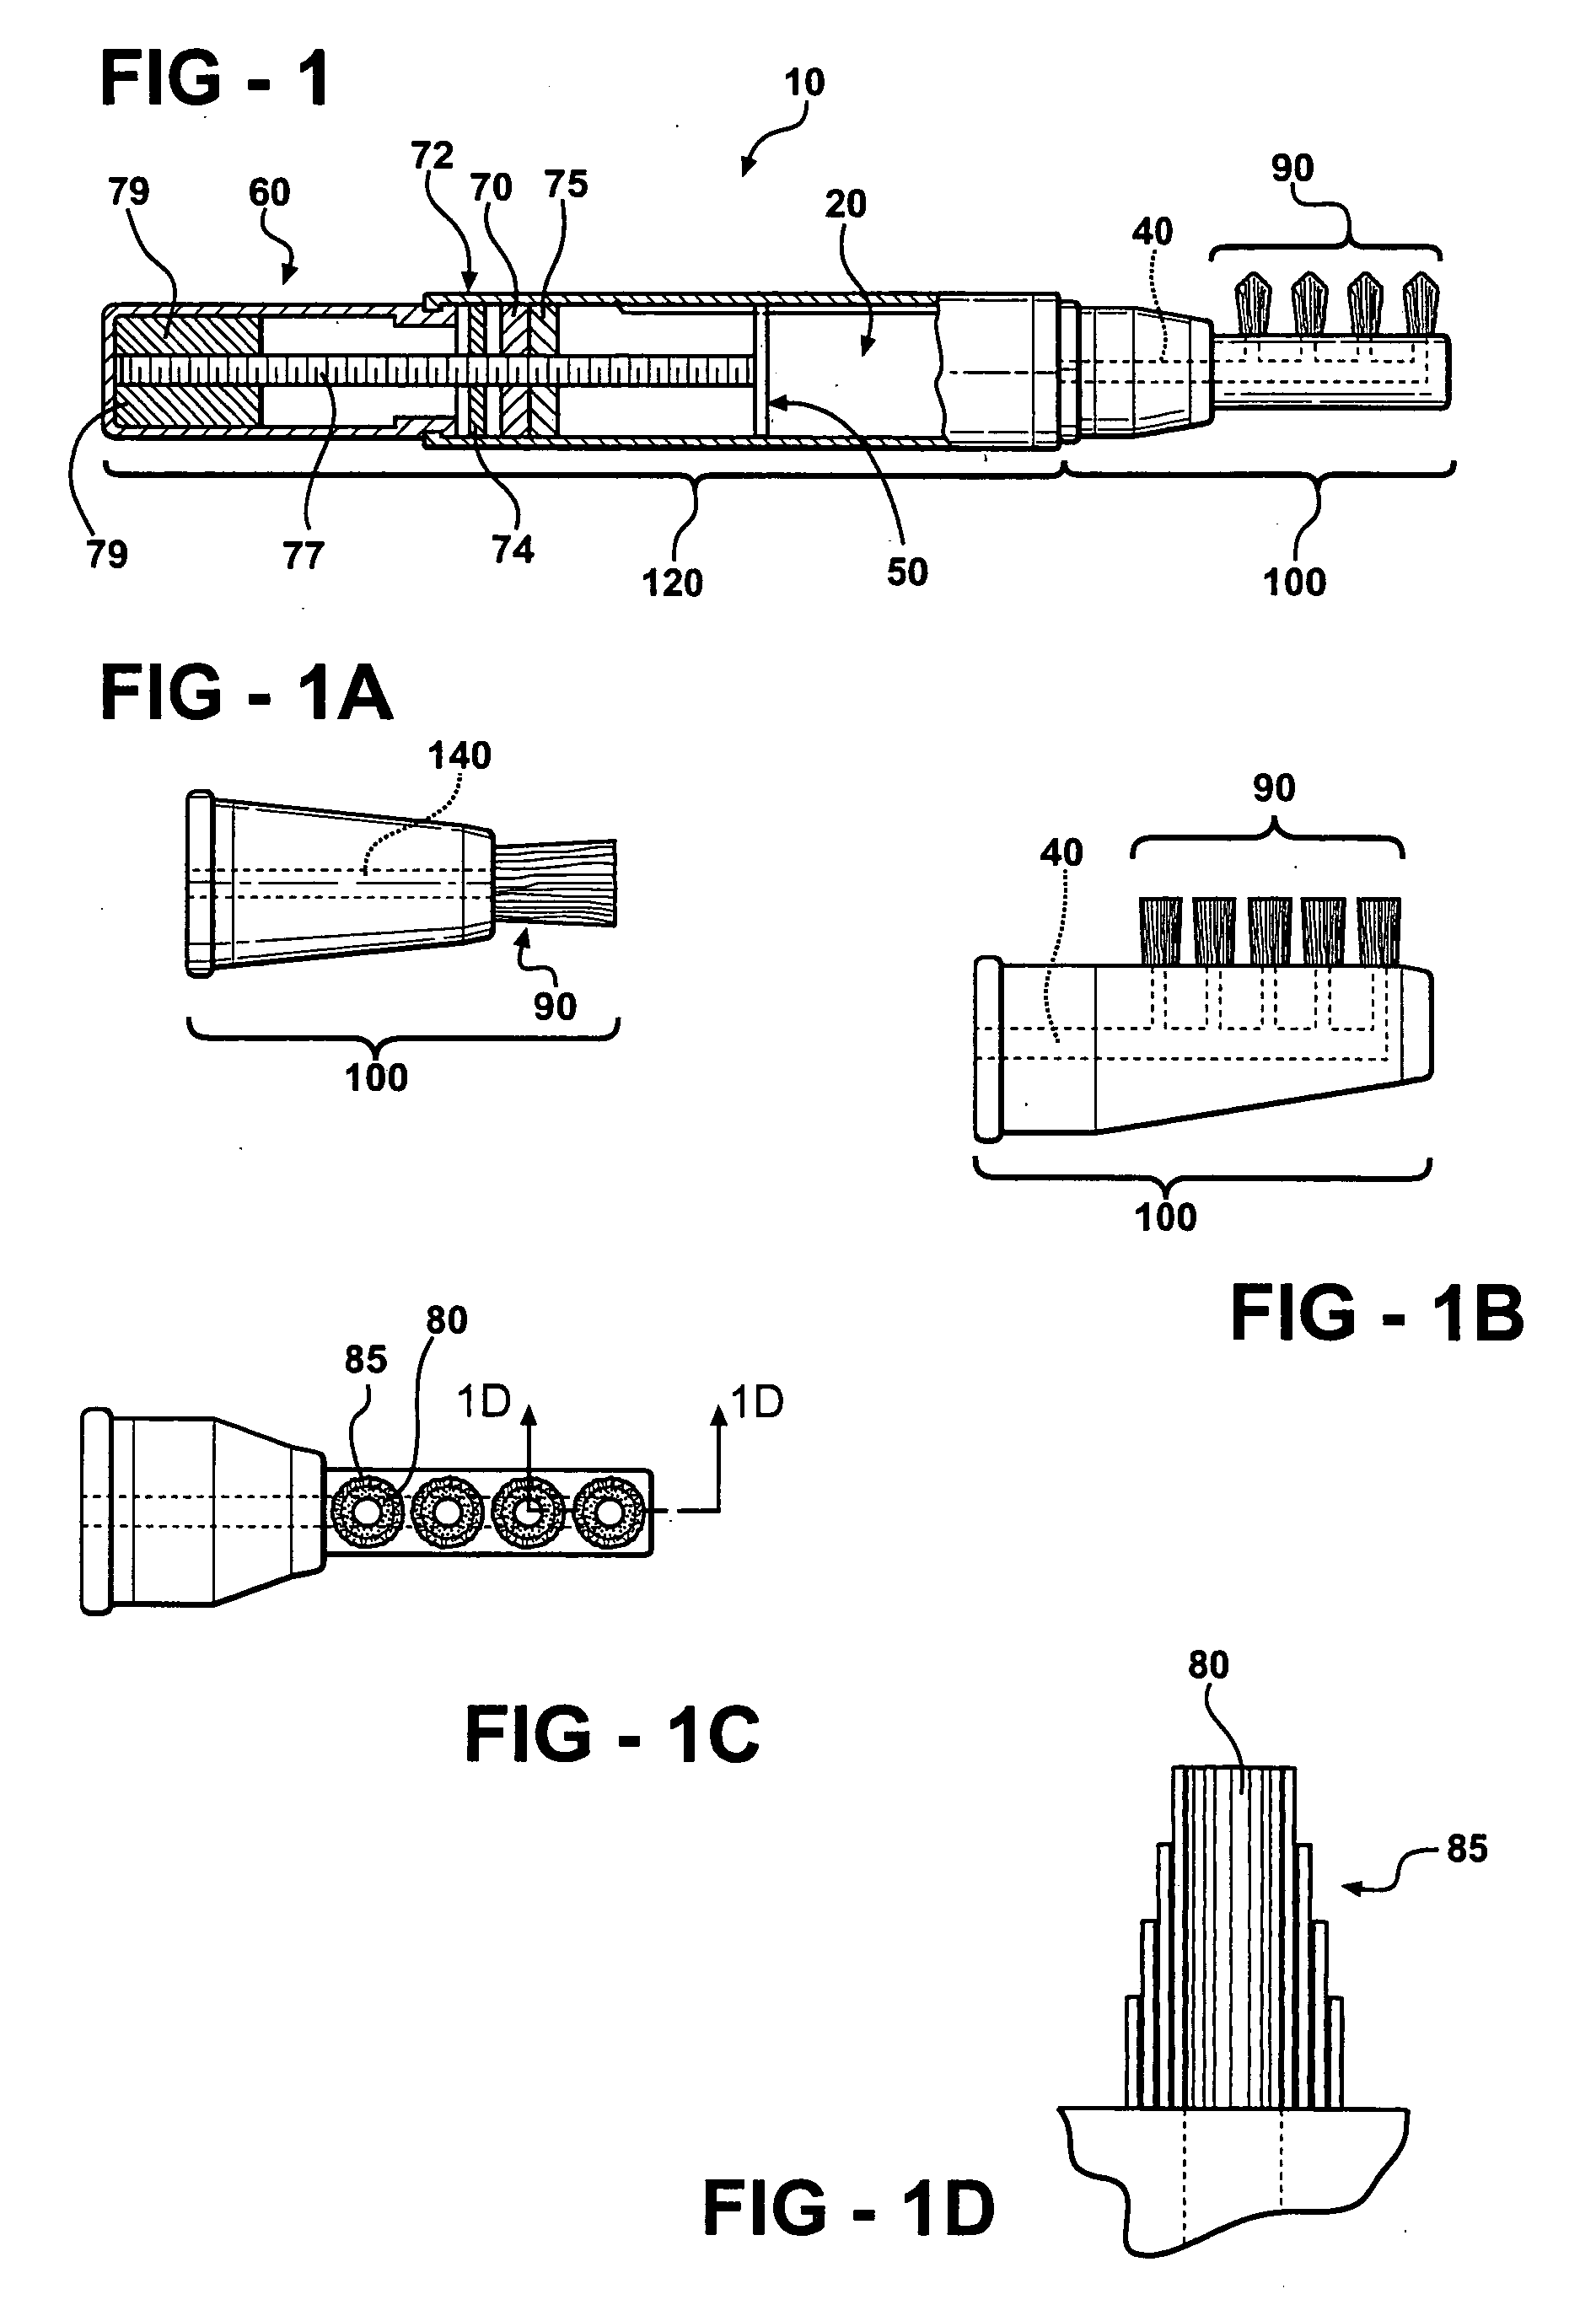 Process of tooth whitening and apparatus therefor